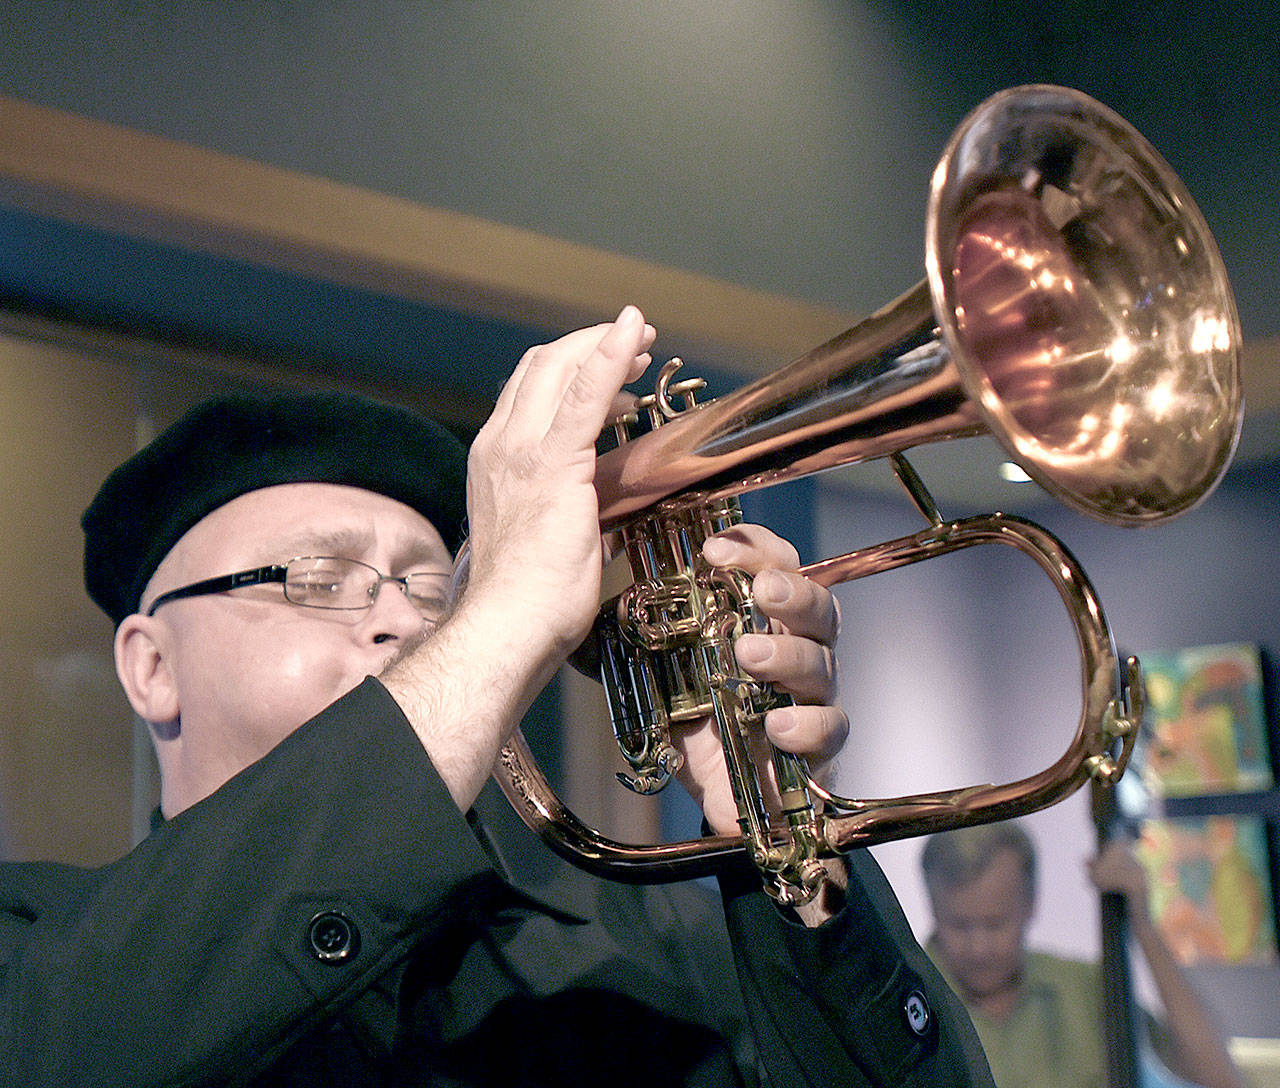 Flugelhornist Dmitri Matheny and his quartet will perform Jazz from the Silver Screen on Saturday.